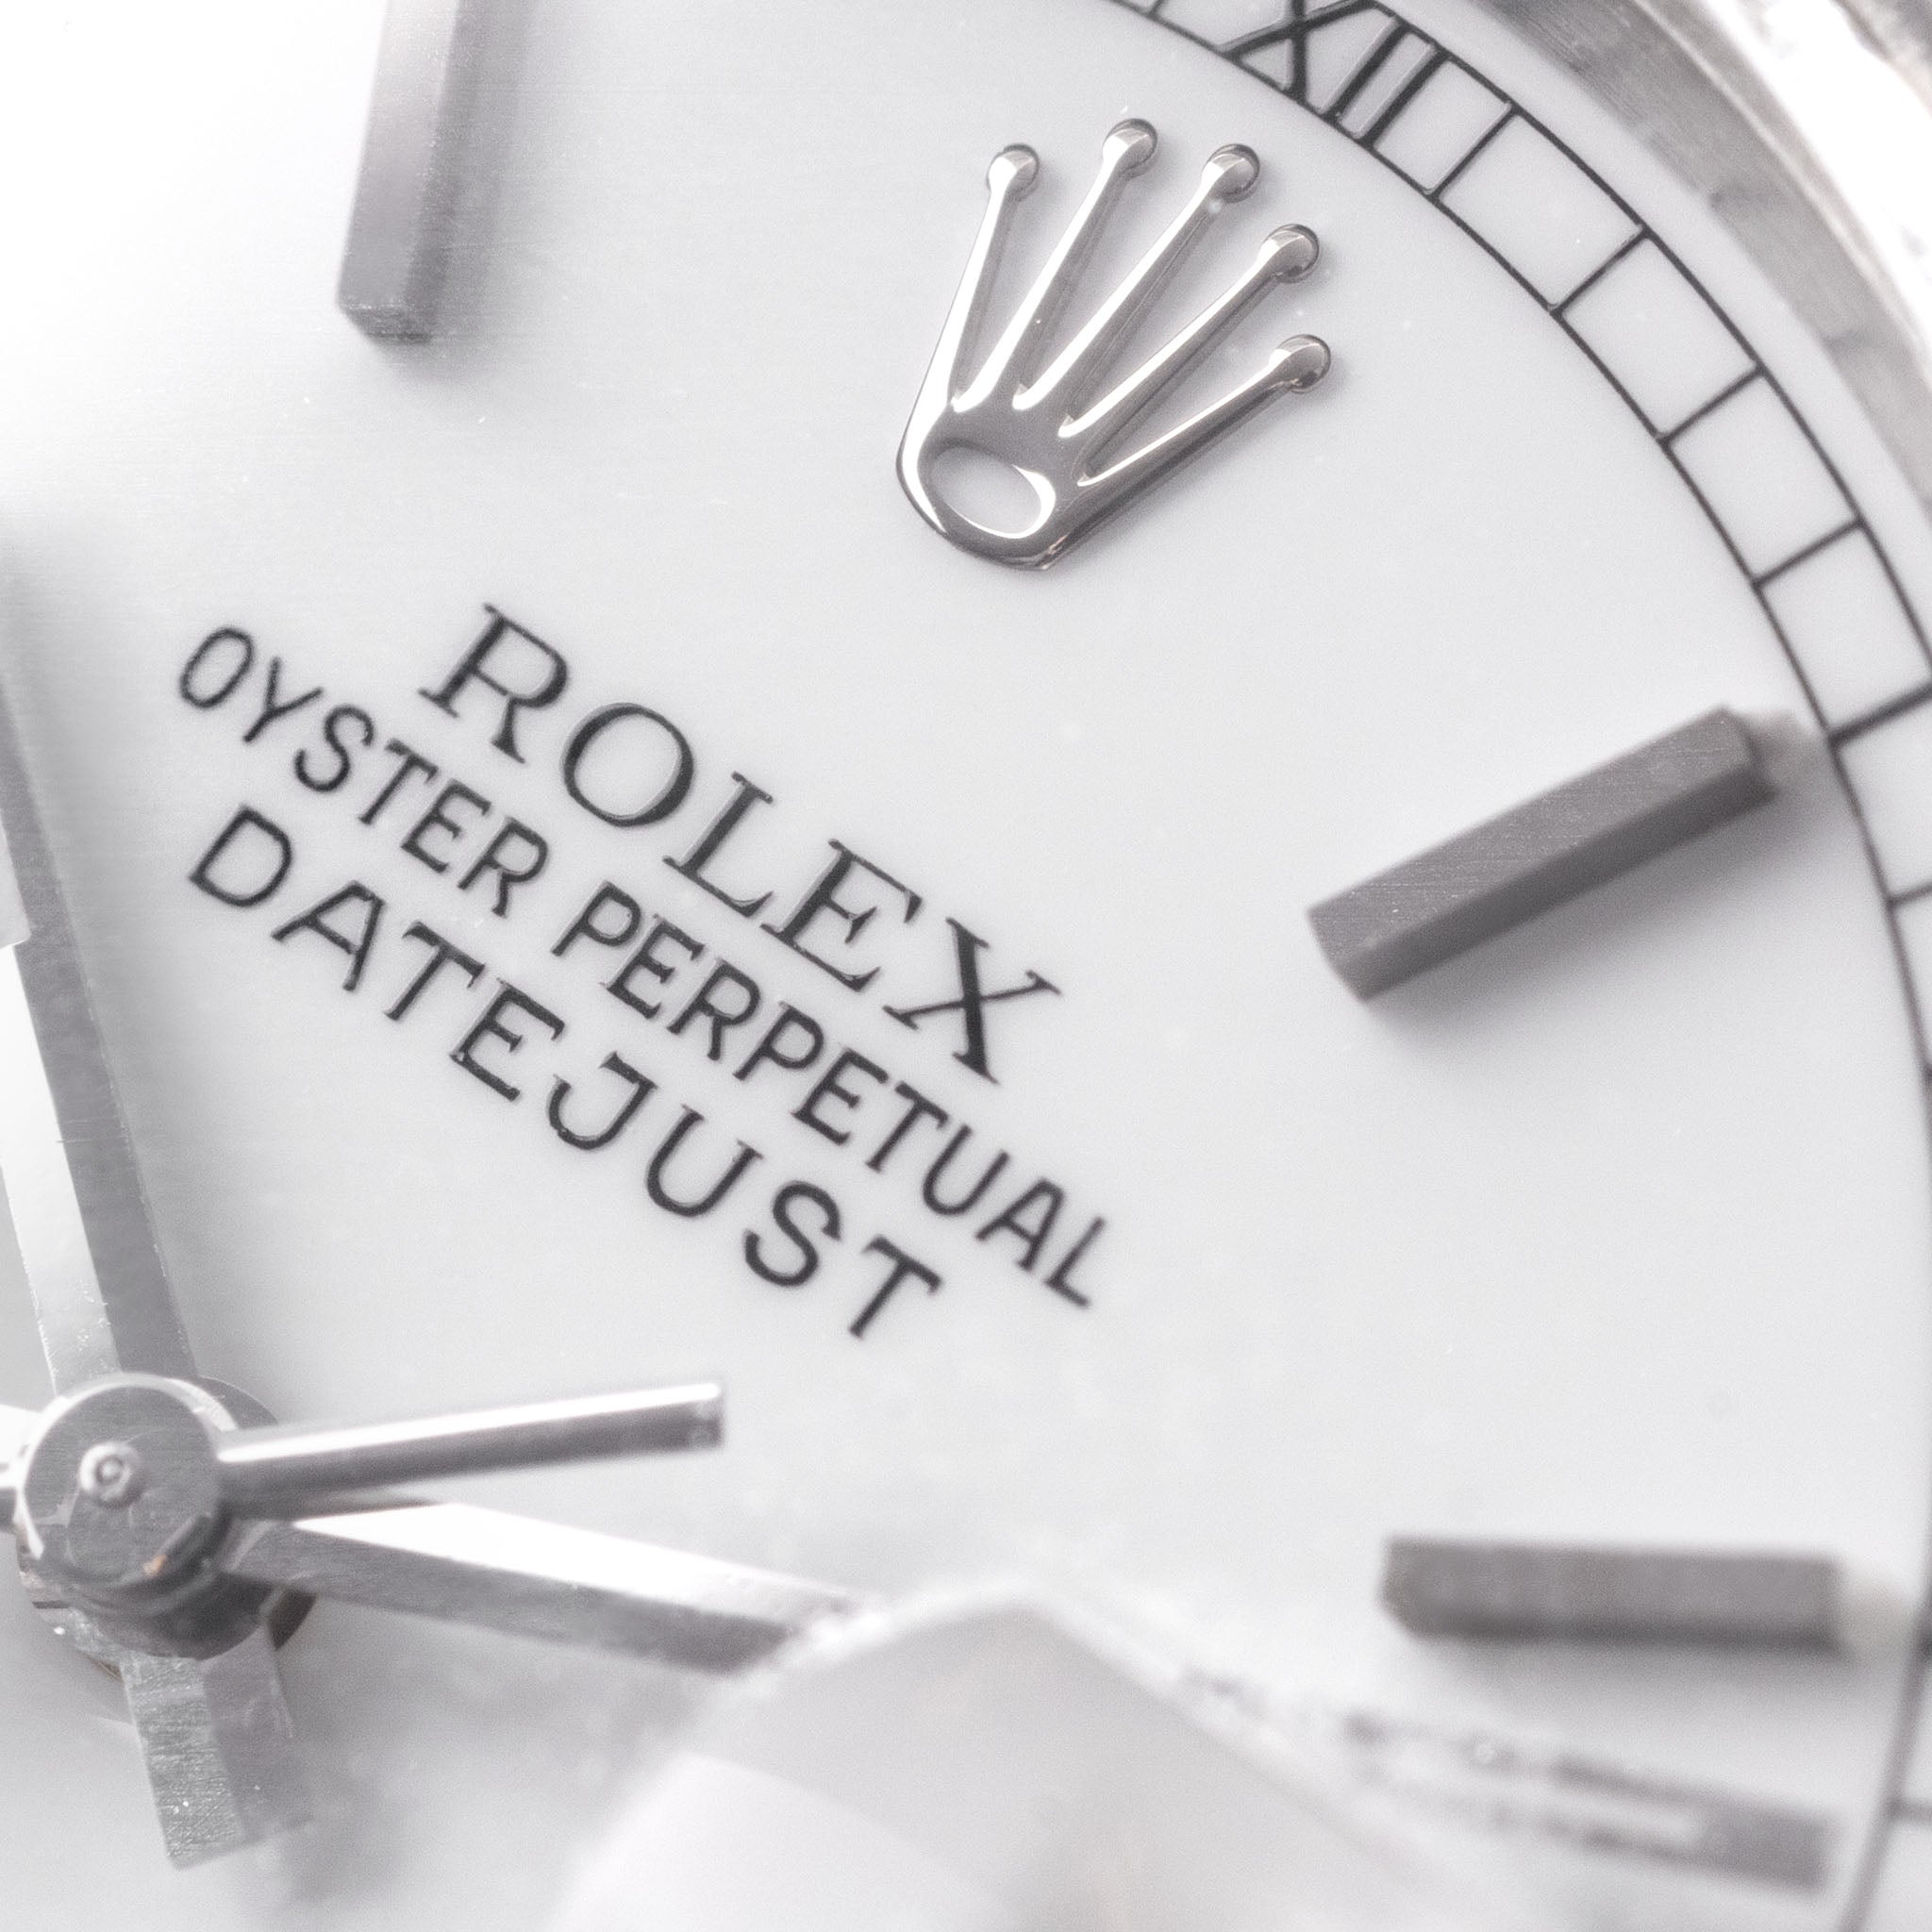 Rolex Datejust White Porcelain Dial Reference 16220 